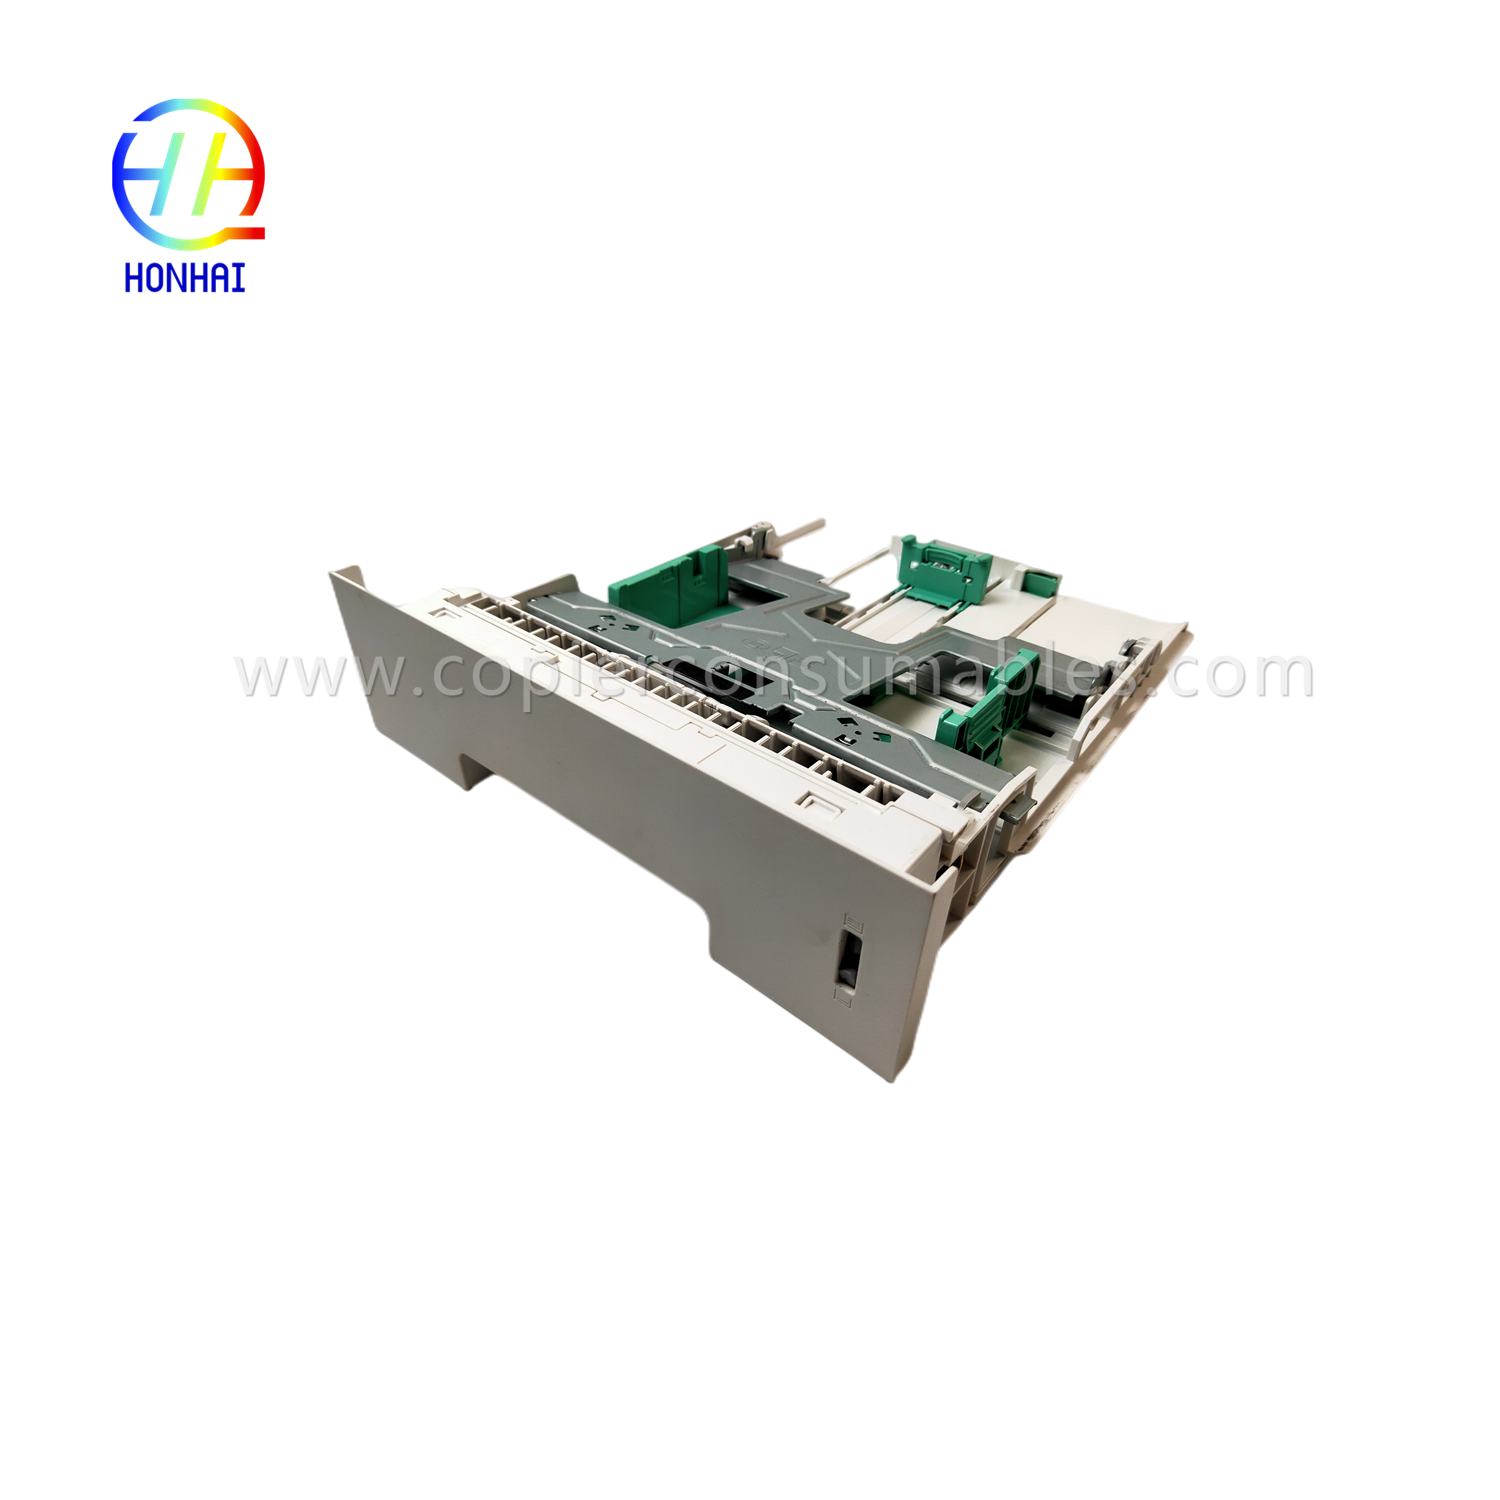 https://www.copierconsumables.com/paper-tray-assemble-for-xerox-phaser-3320dni-workcentre-3315dn-3325dni-050n00650-cassette-paper-tray-product/